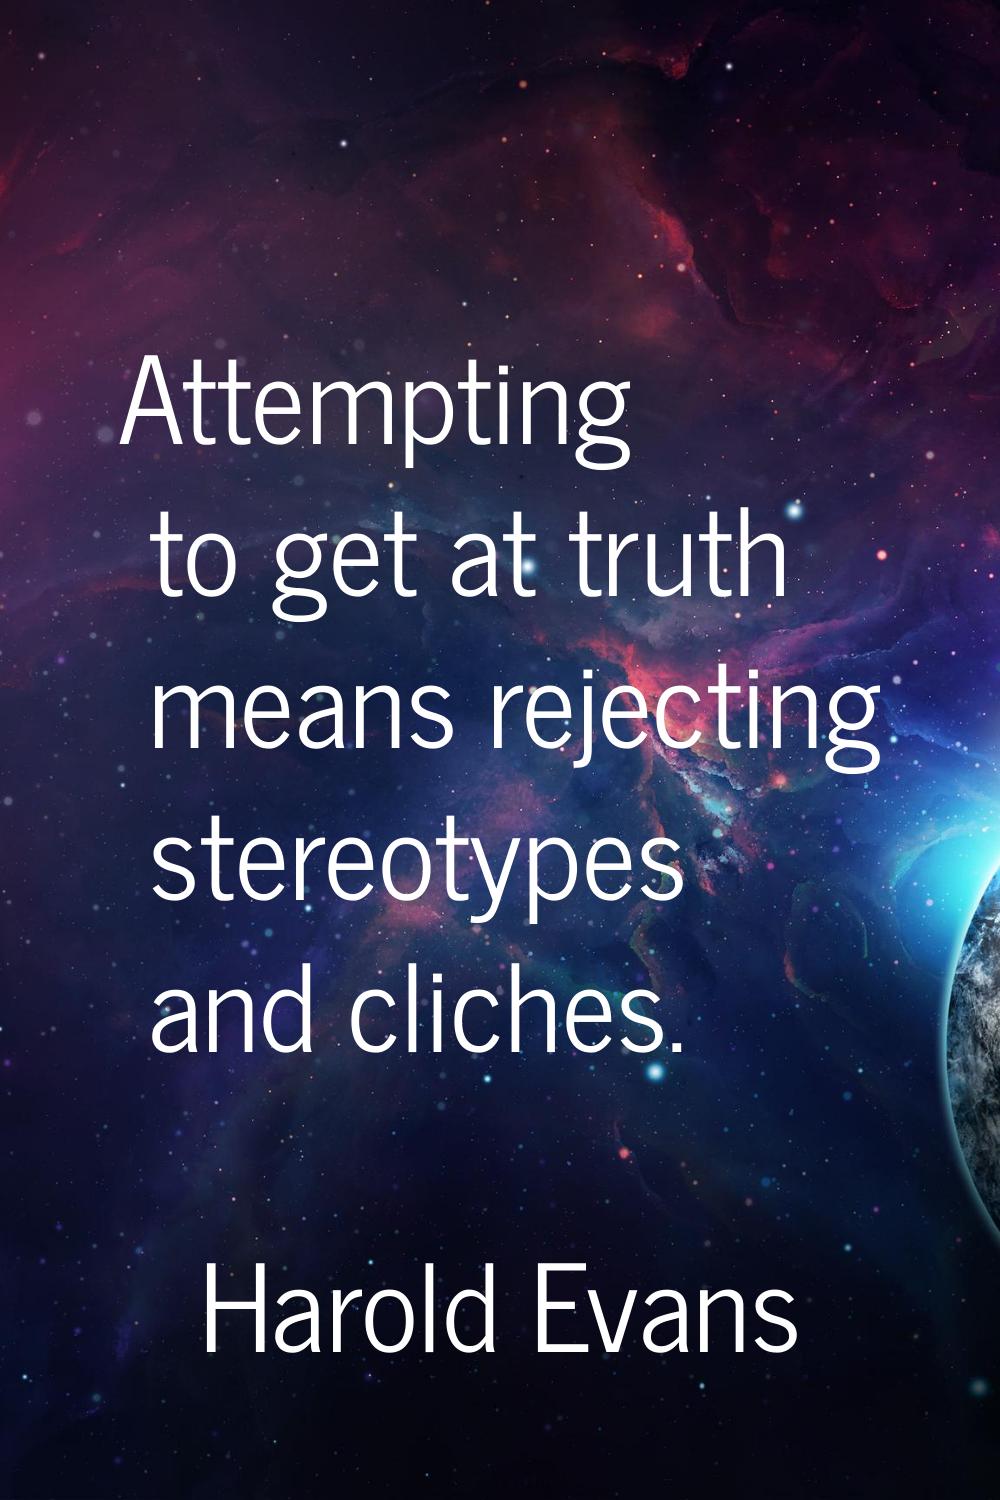 Attempting to get at truth means rejecting stereotypes and cliches.